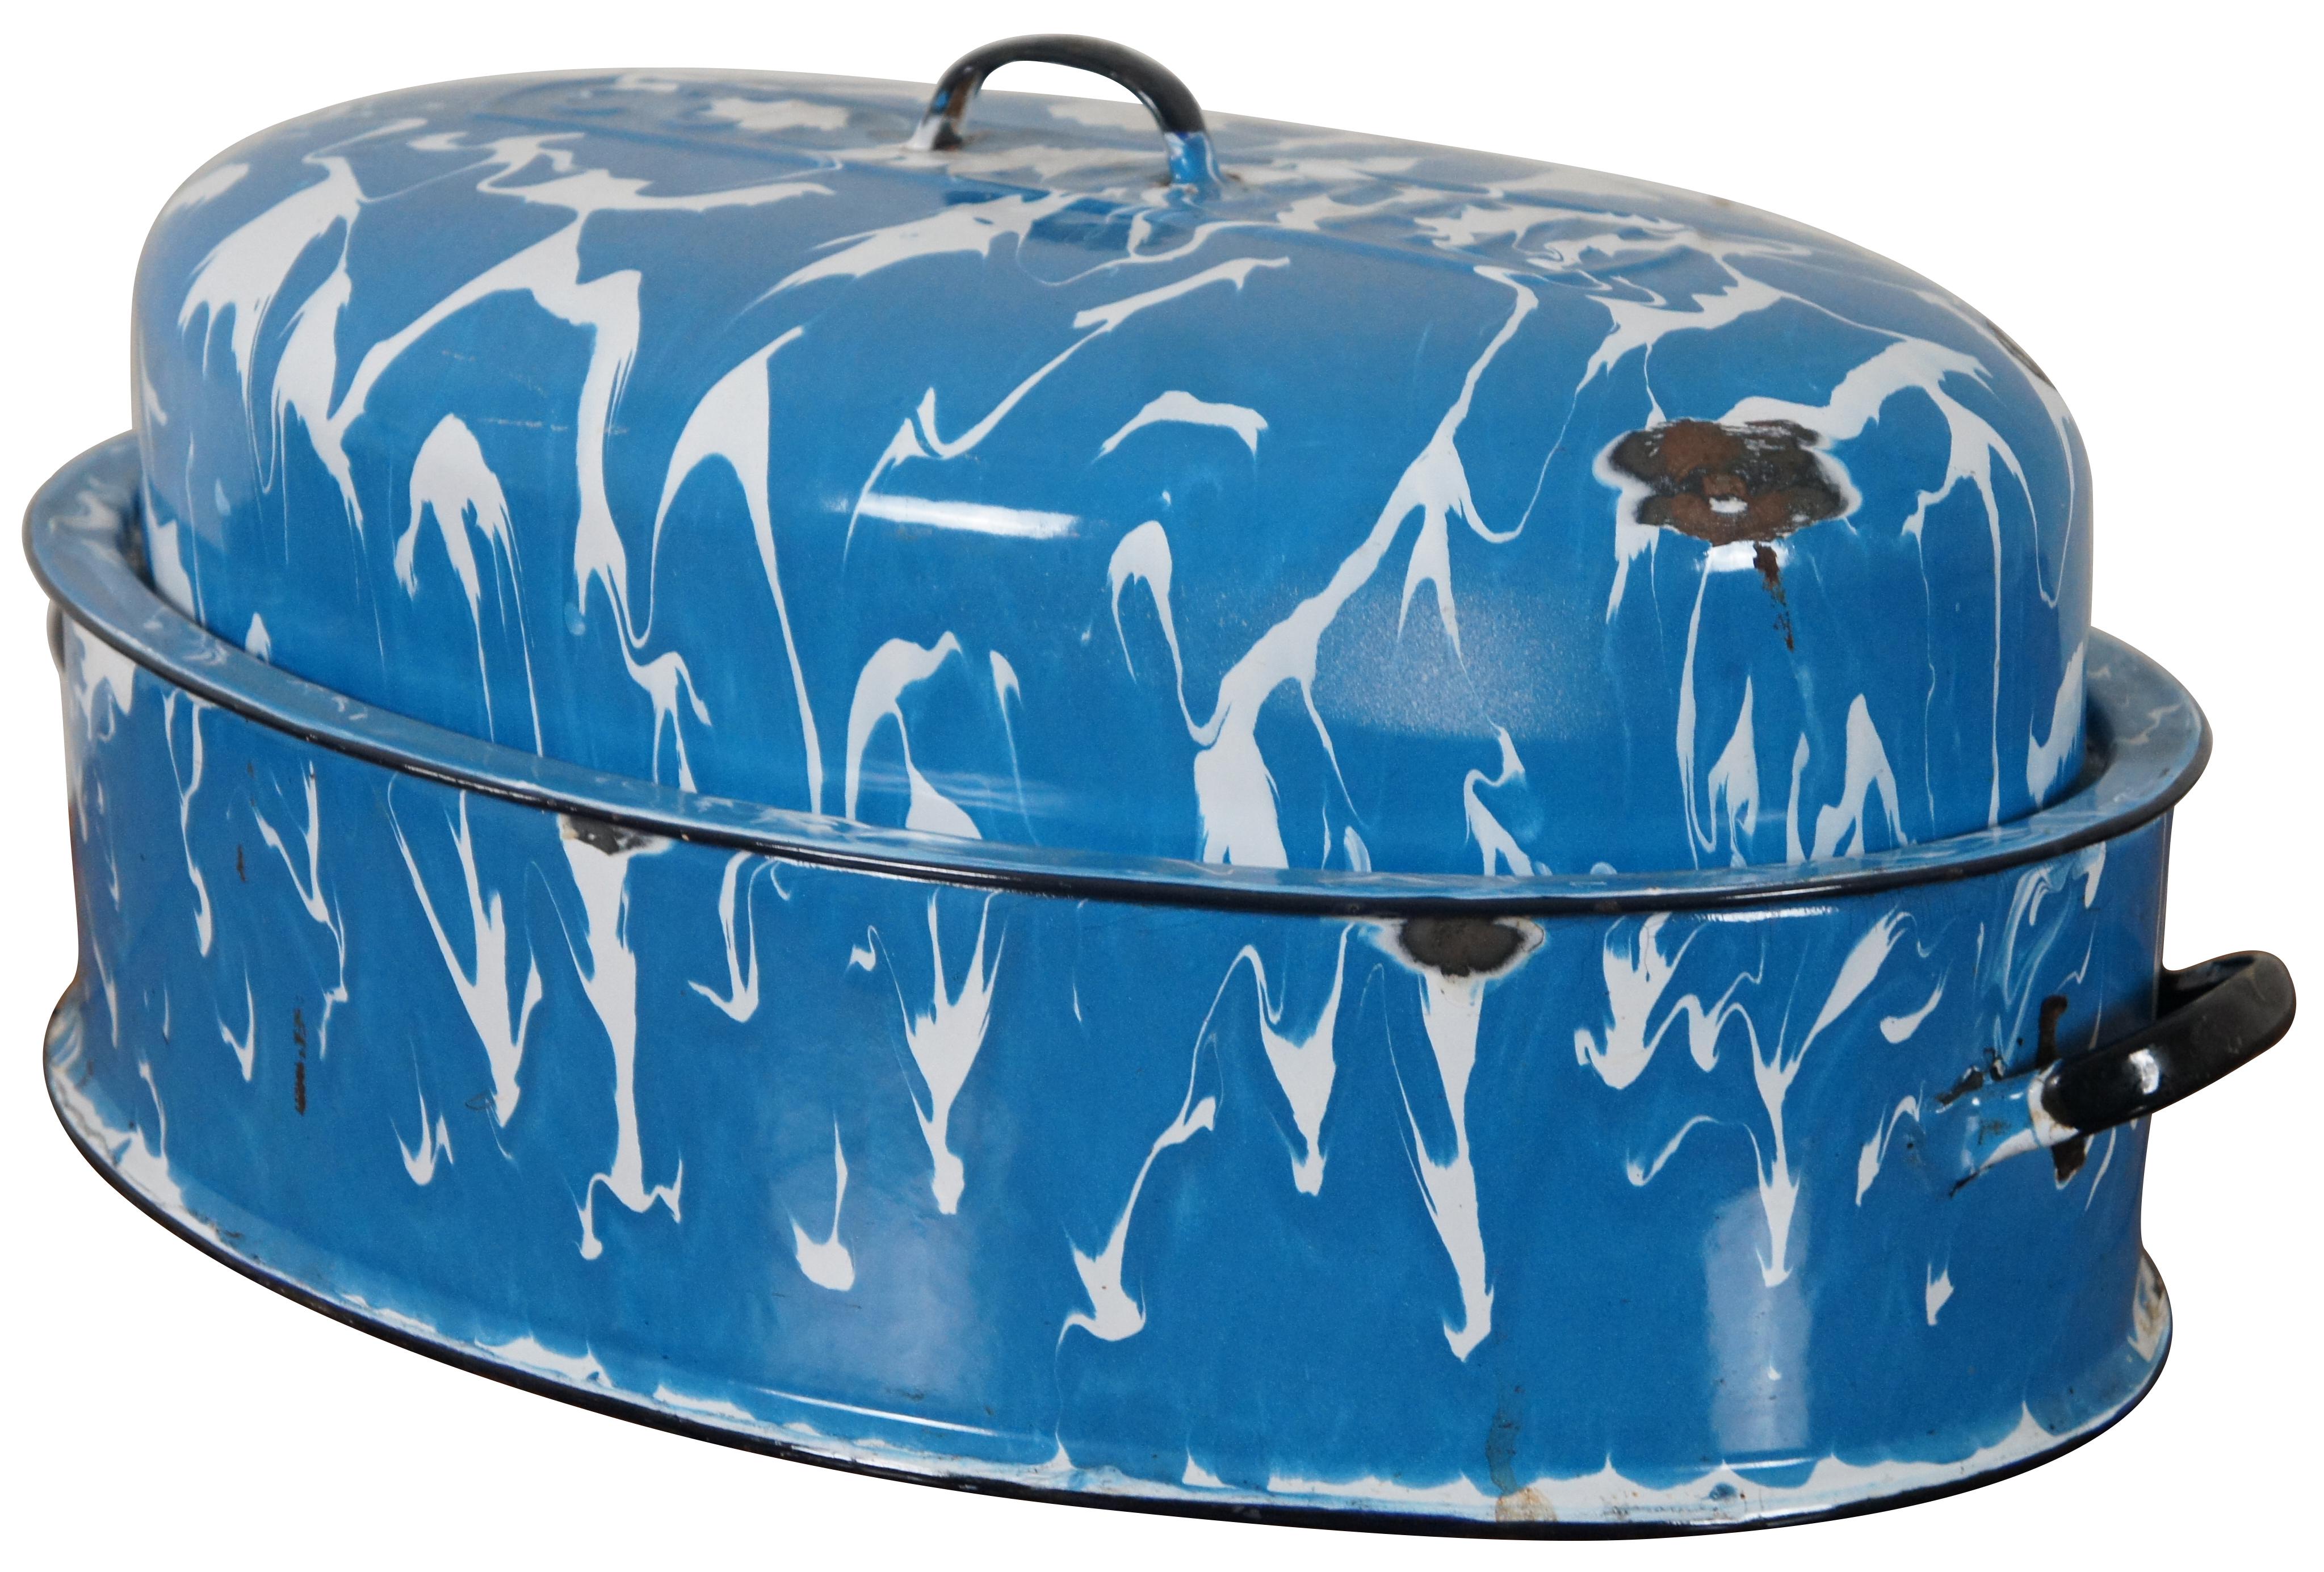 Rare mid century large oval size Columbian turkey roasting pan or pot featuring enameled blue and white marble swirl with lid and handles.

Columbian Home Products purchased the cookware division of General Houseware Corporation in 1998. GHC